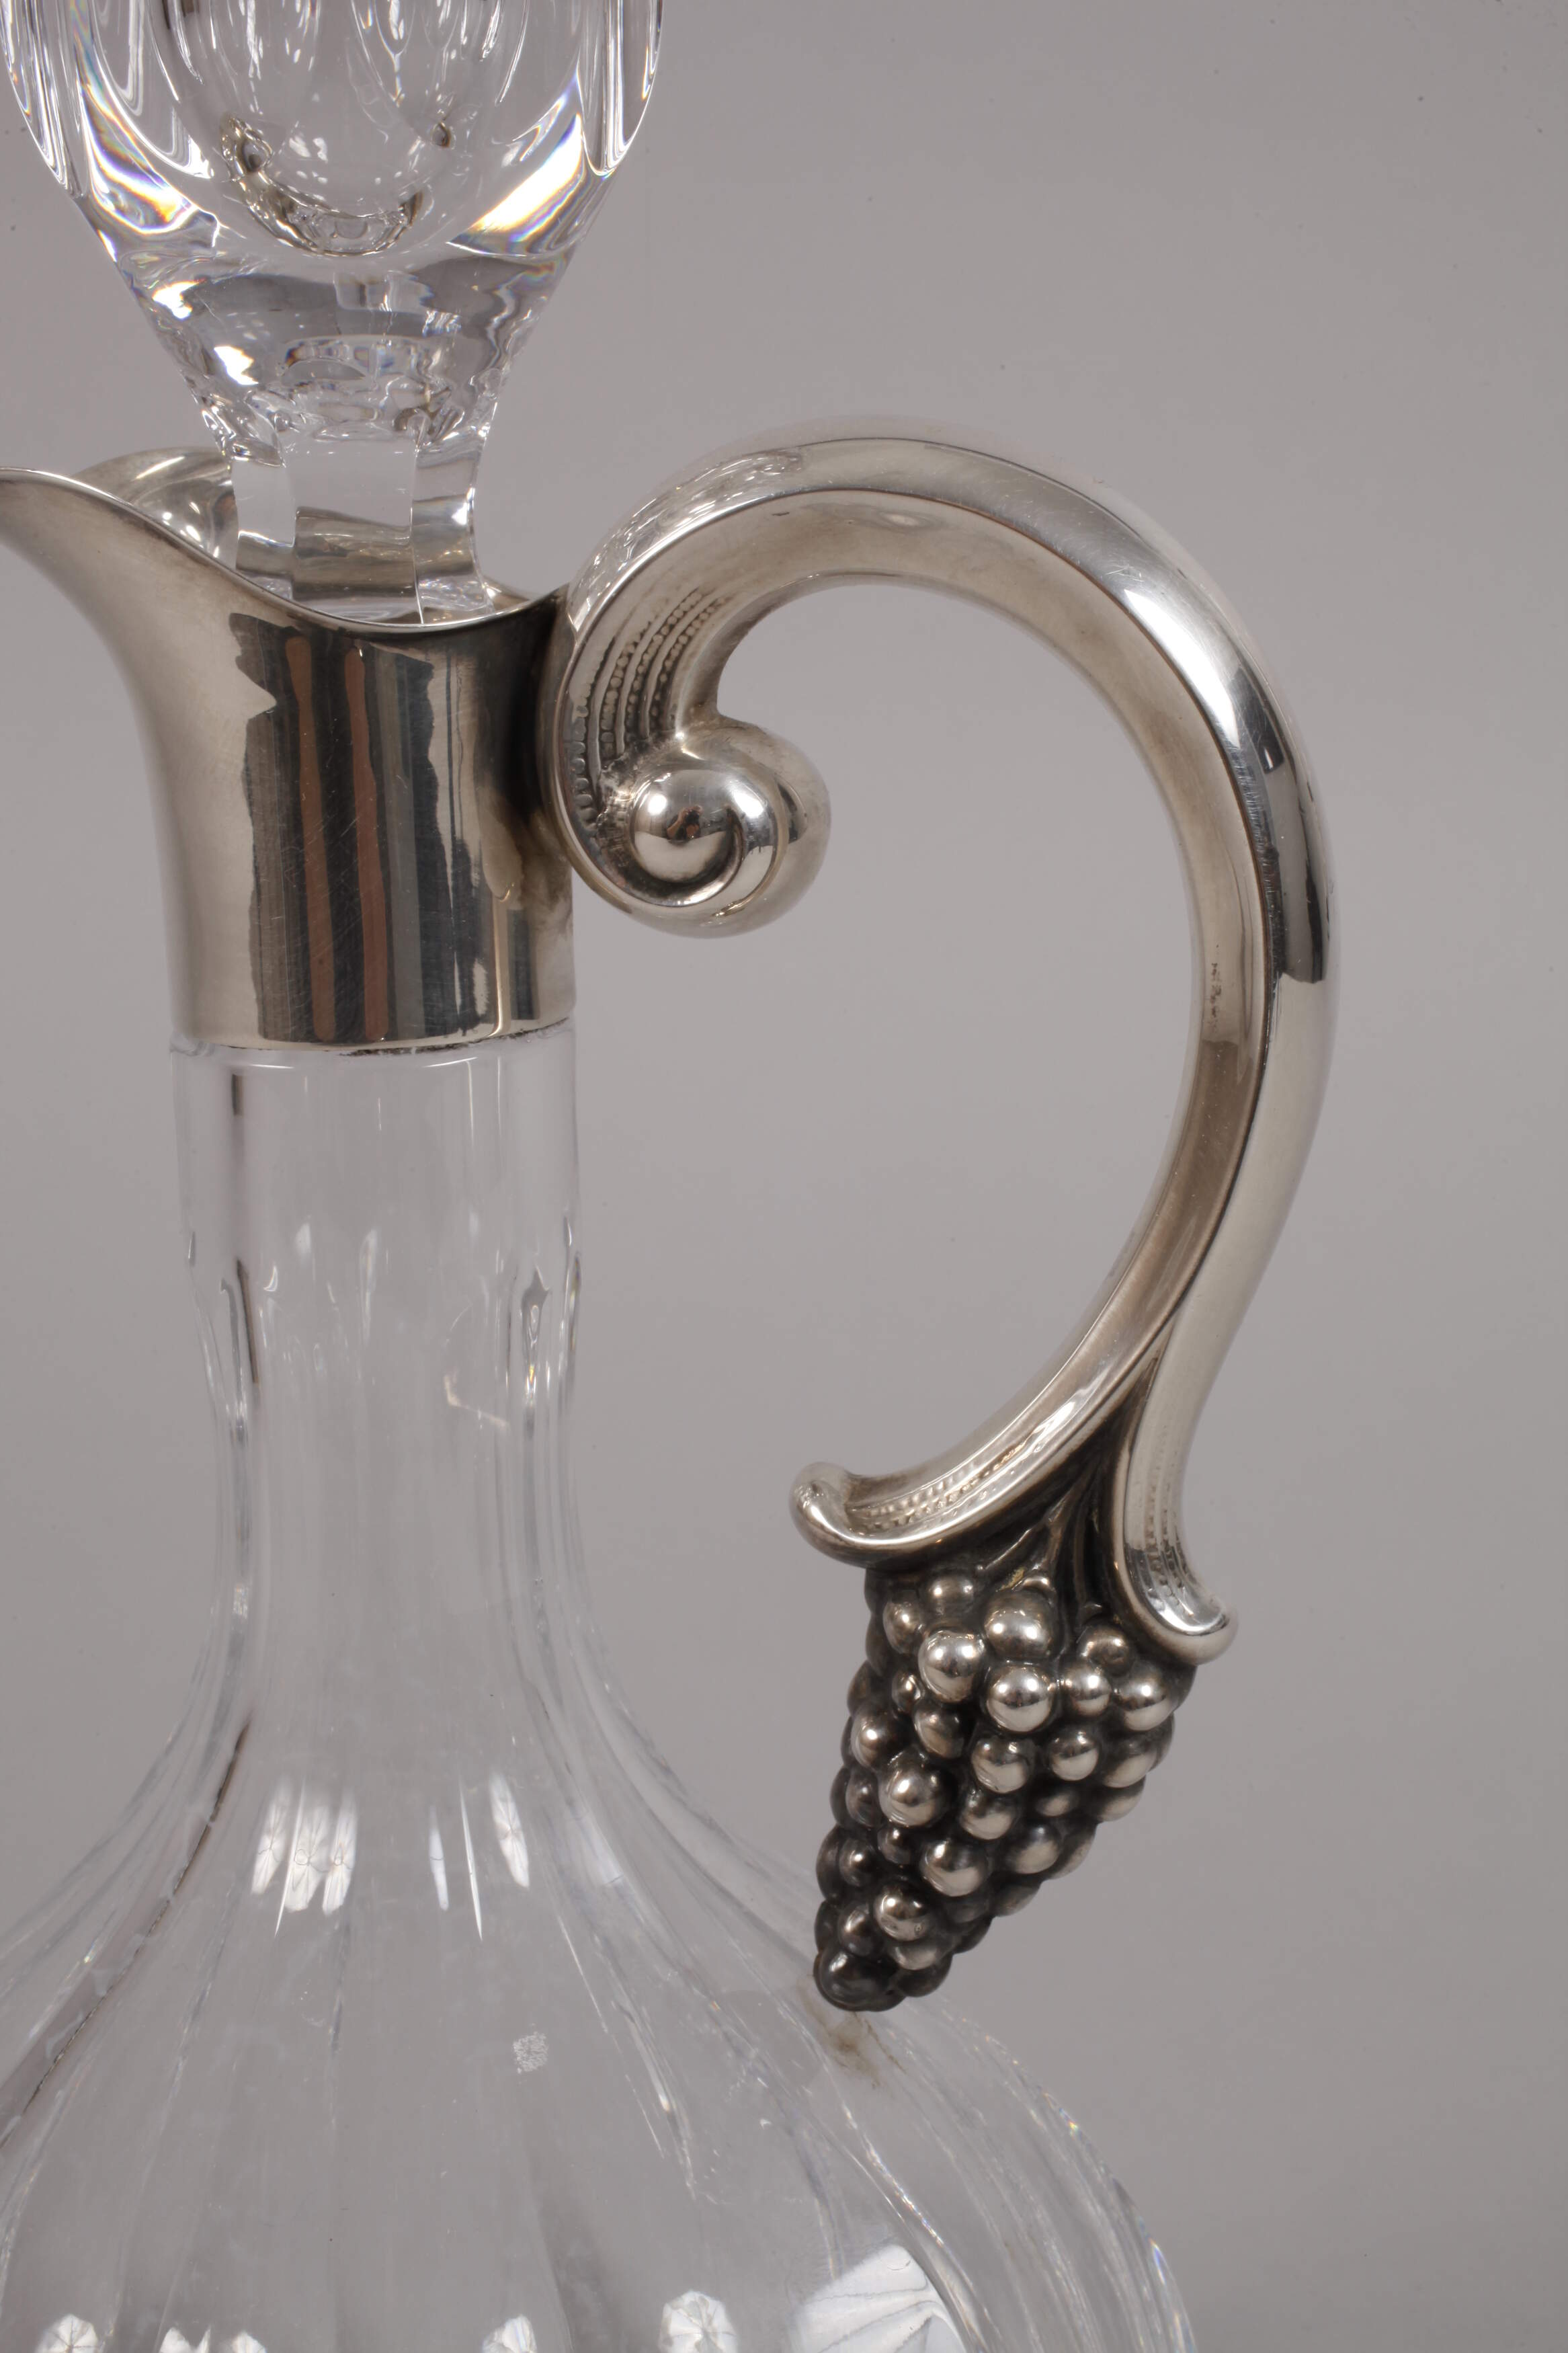 Wine carafe with silver mount - Image 2 of 3